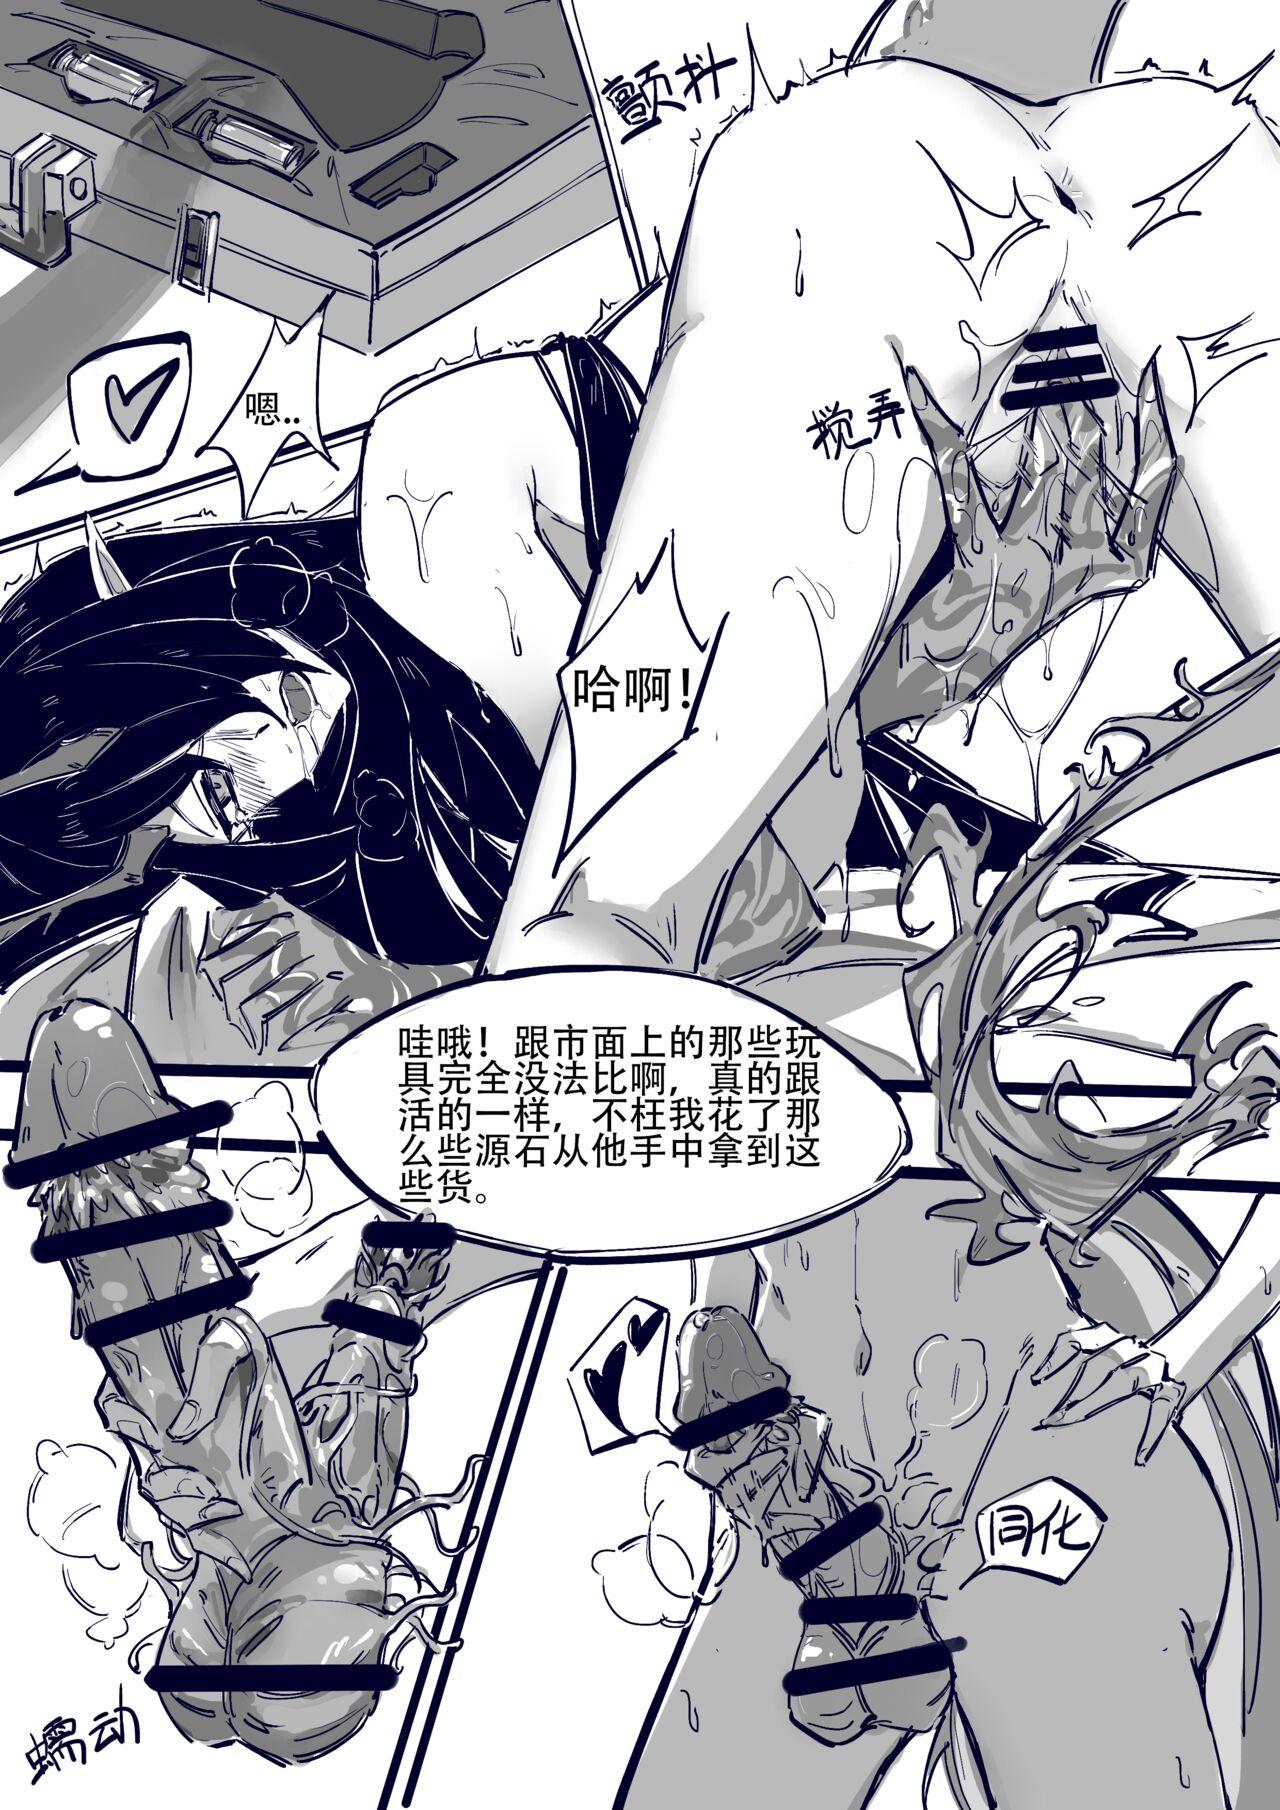 Awesome [D仔] Doctor vs Dragon Bubble (Full) | 博士大战龙泡泡 (完整版) (Arknights) [Chinese] - Arknights Petite Teenager - Page 6